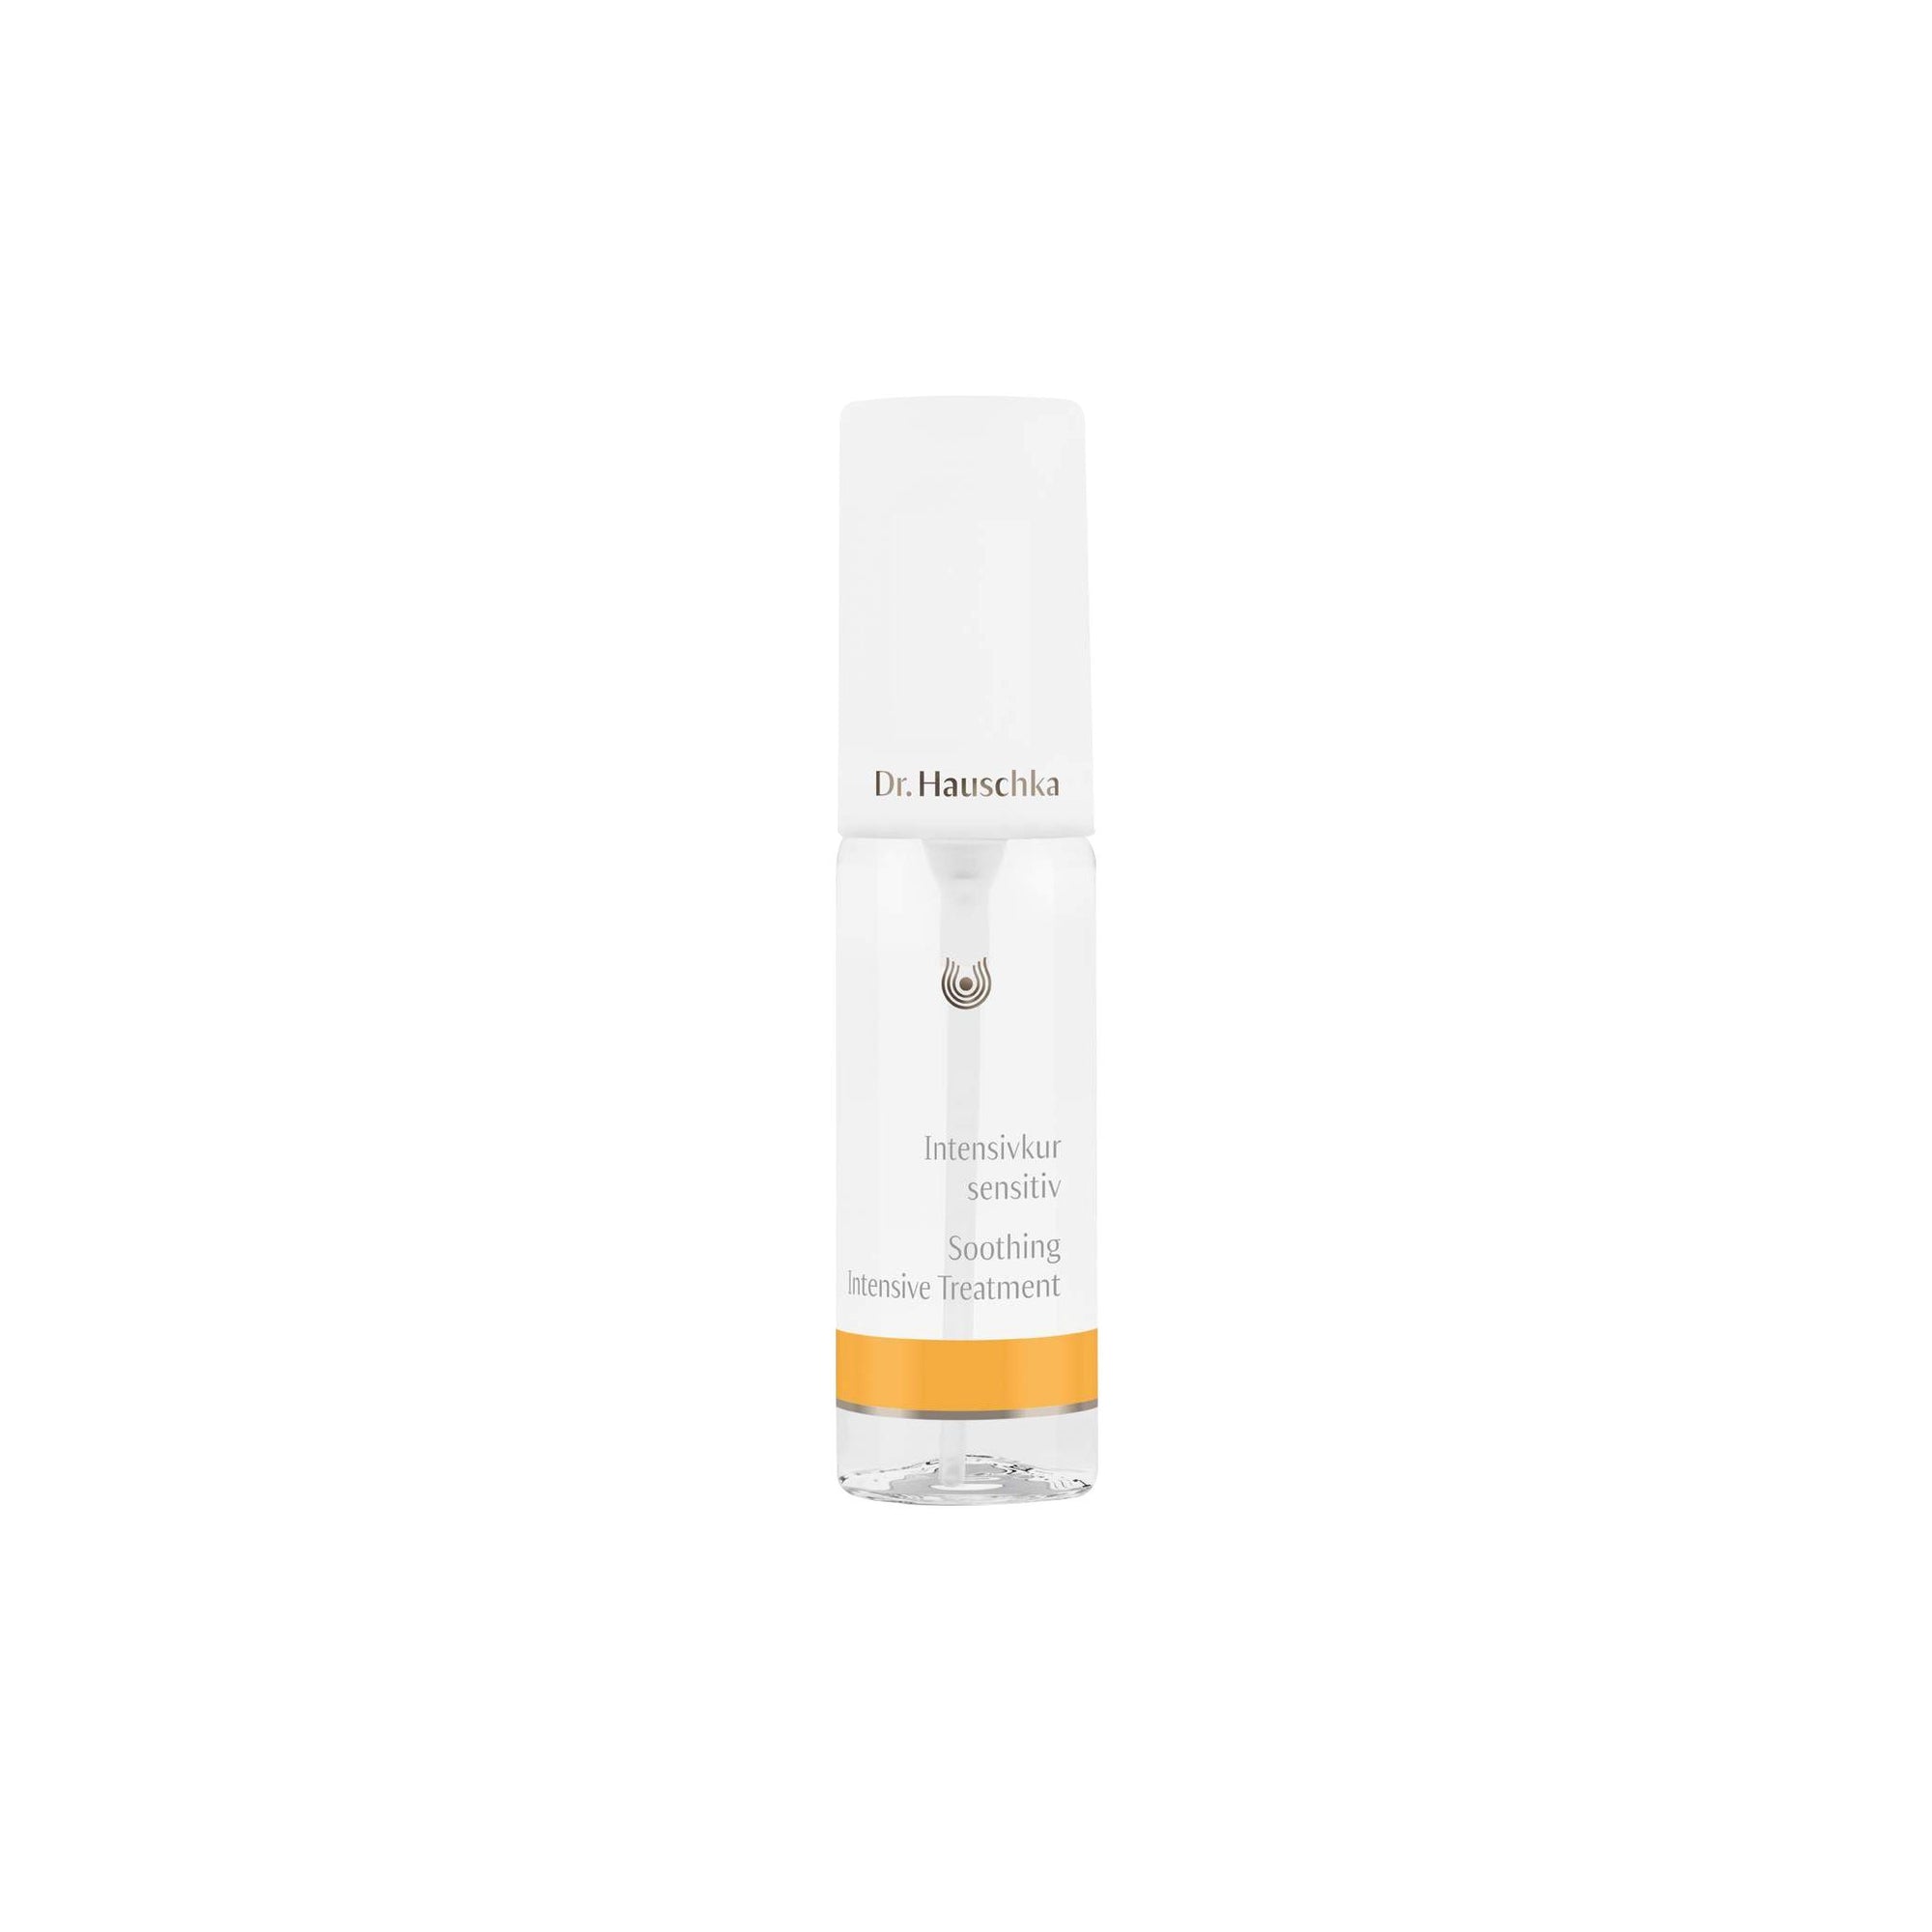 Dr Hauschka Soothing Intensive Treatment 40ml